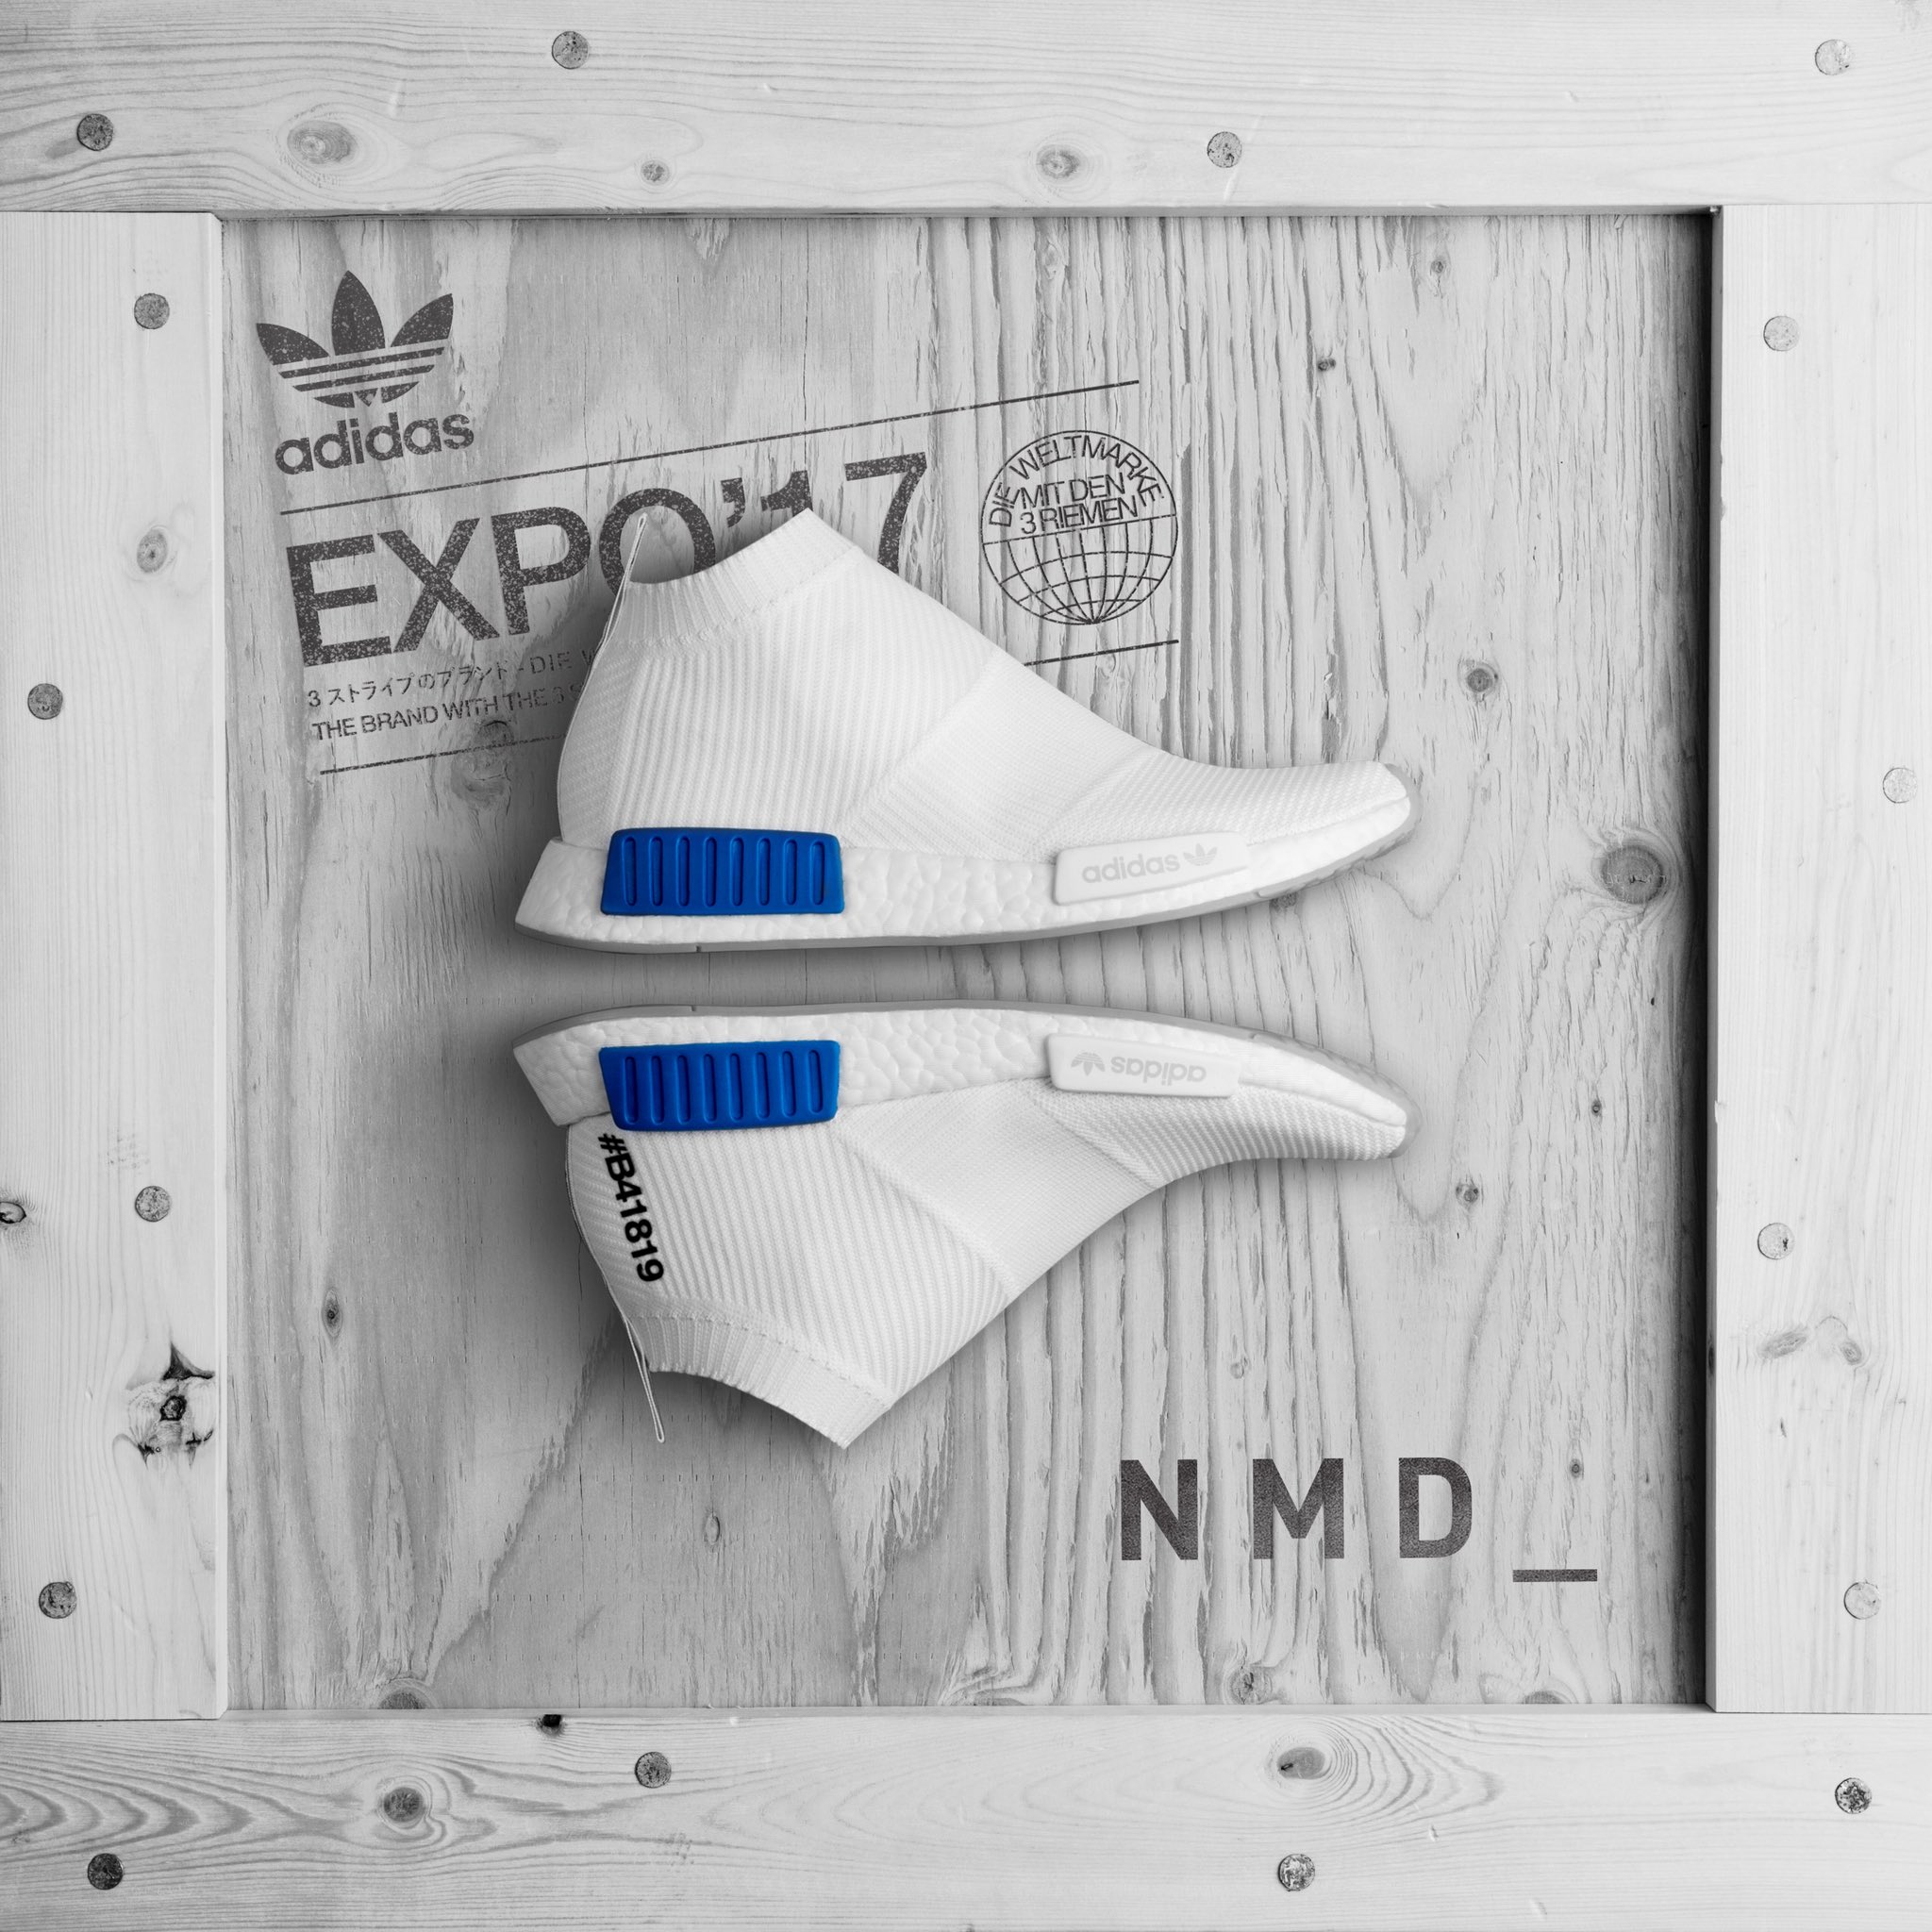 adidas Originals on Twitter: "Introducing the Archive Oddities Pack in celebration of EXPO' 17. City Sock and #EQT Support 93/17 release exclusively at #ComplexCon. https://t.co/dtC05455lJ" / X